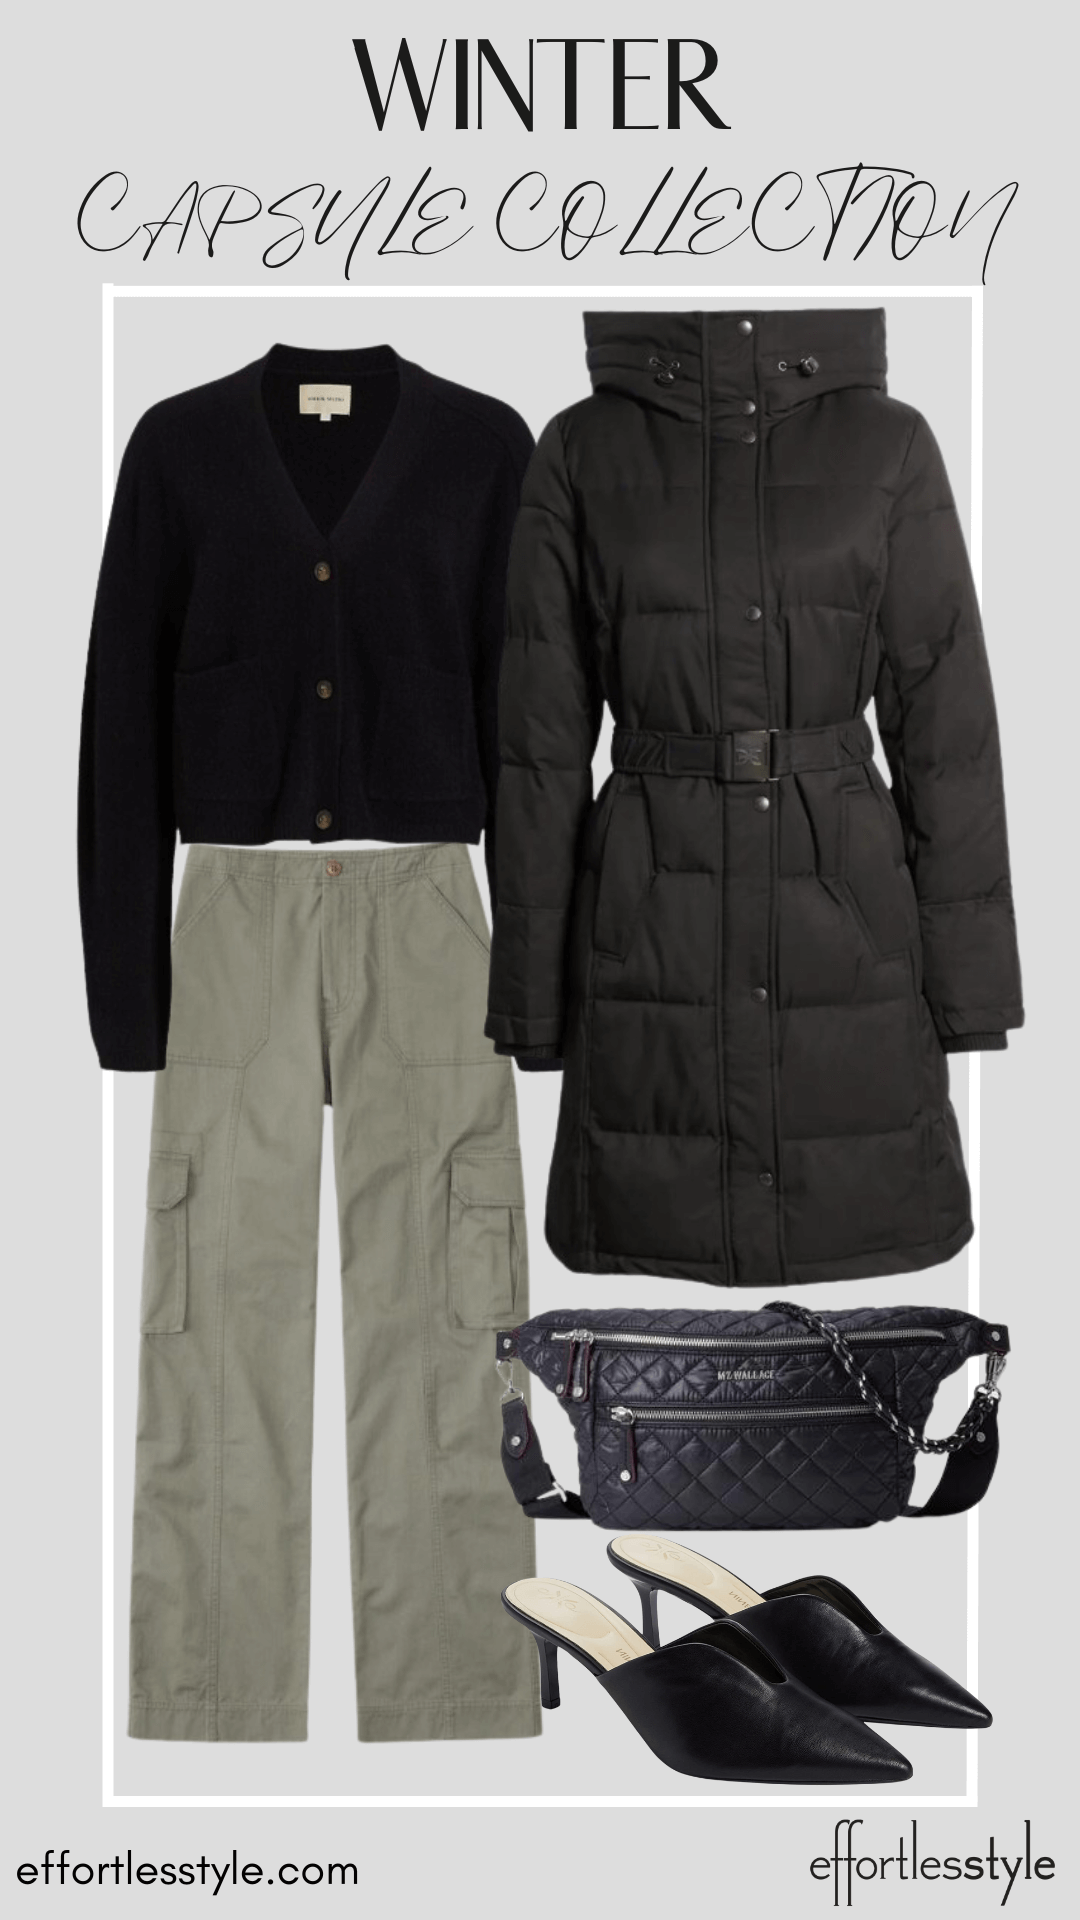 How To Wear Our Winter Capsule Wardrobe - Part 1 Puffer Coat & Cropped Cardigan & Cargo Pants how to style cargo pants in winter how to wear cargo pants with heels how style cargo pants with mules Nashville area stylists share stylish winter coats how to style a puffer coat how to style a puffer jacket